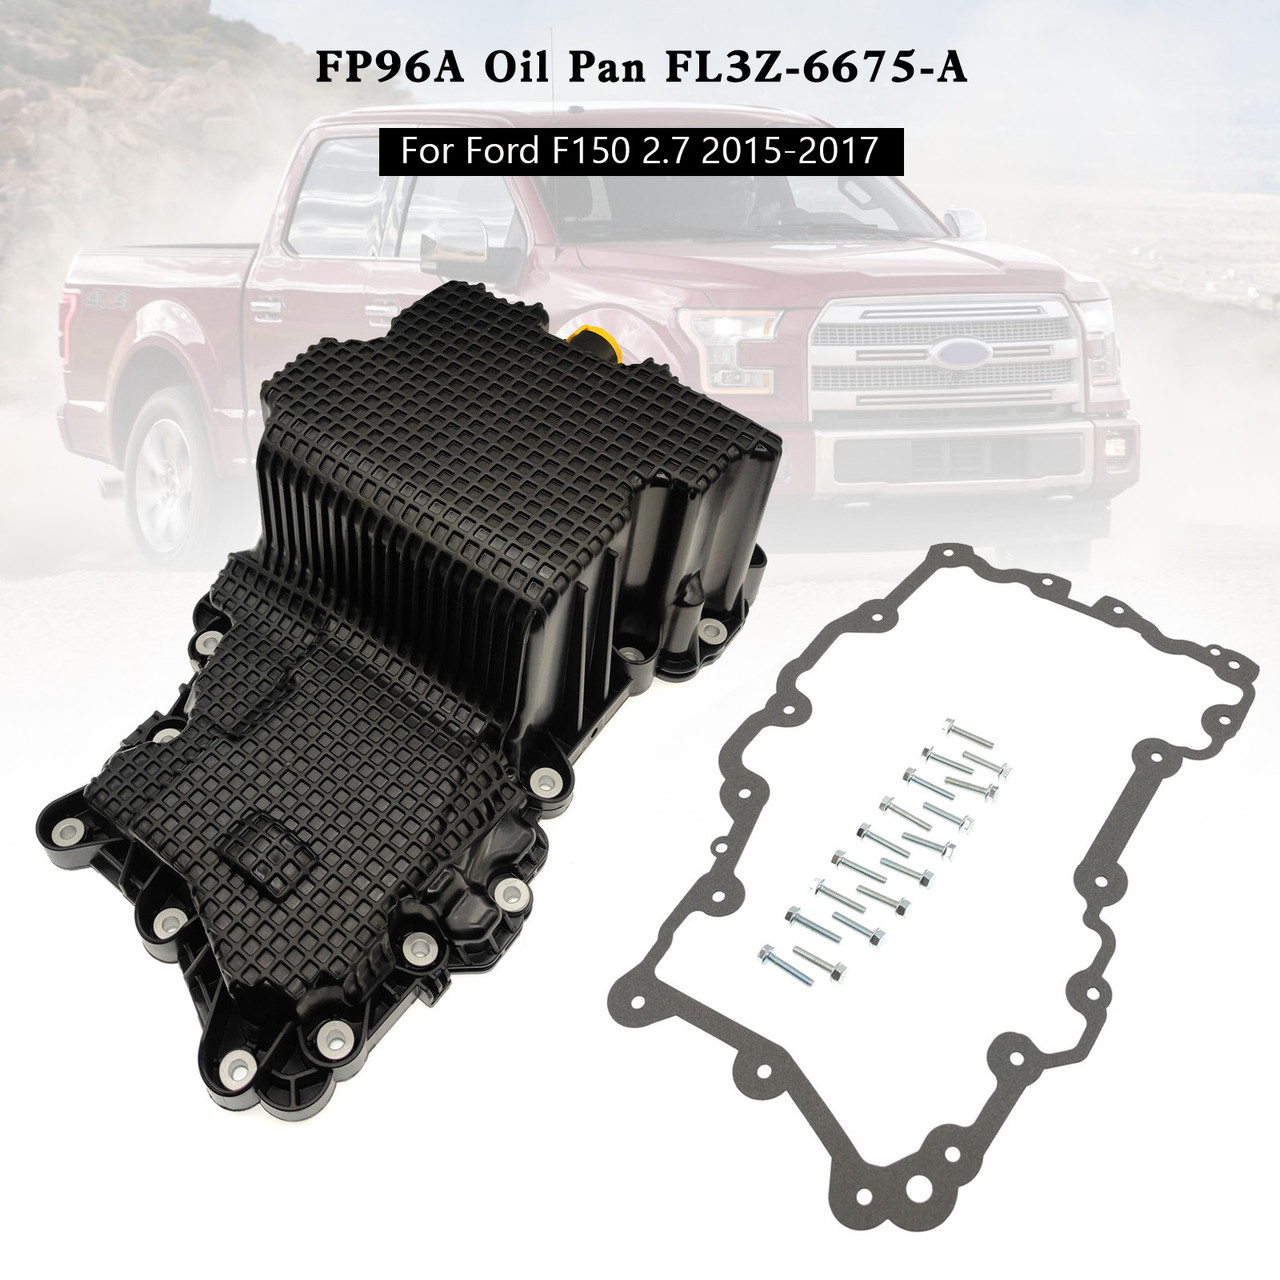 FP96A Oil Pan FL3Z-6675-A For Ford F150 2.7 2015-2017